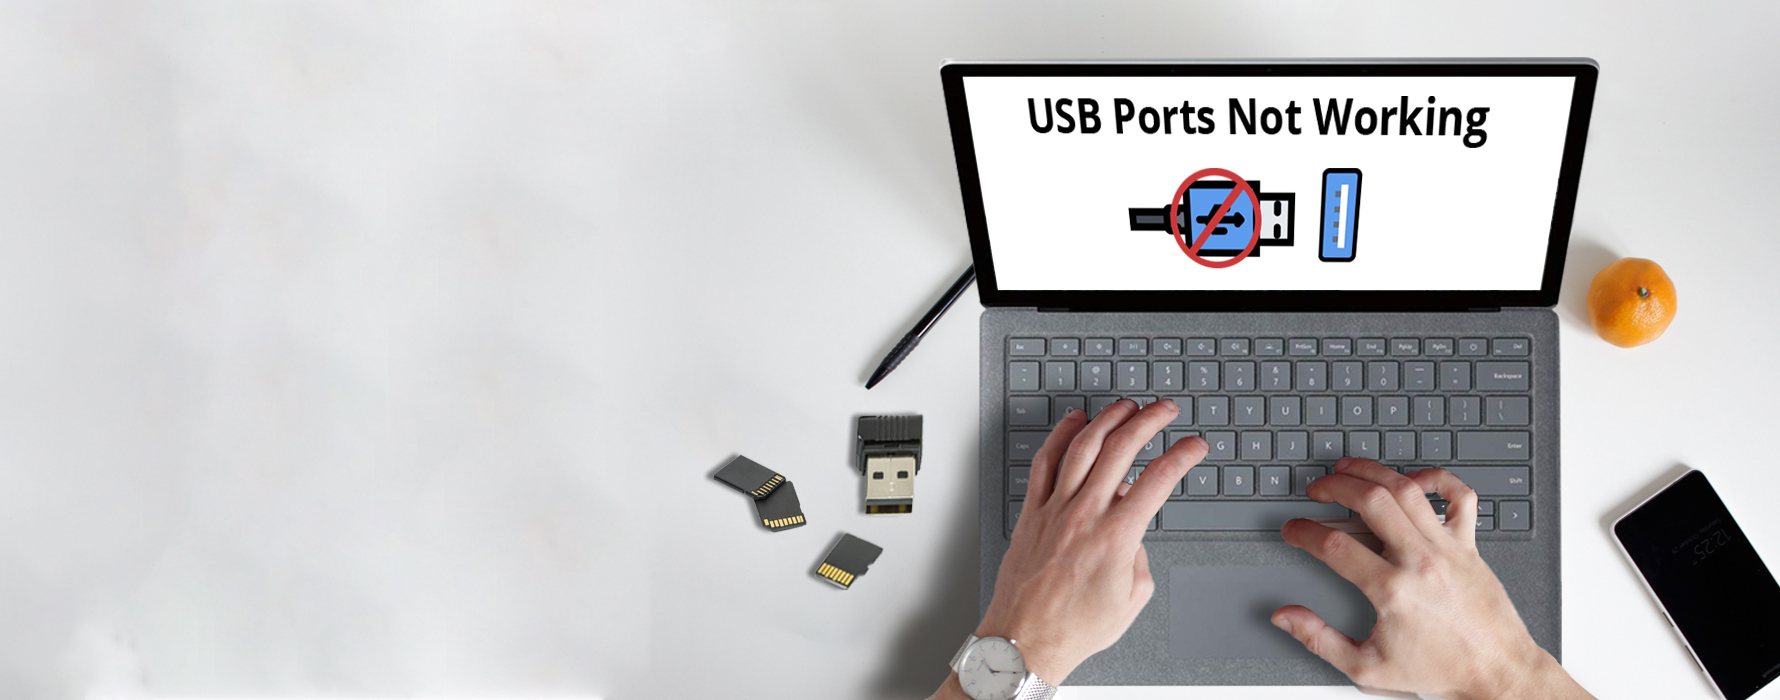 Fixed] USB Ports Not Working in Windows 23. Quickly & Easily